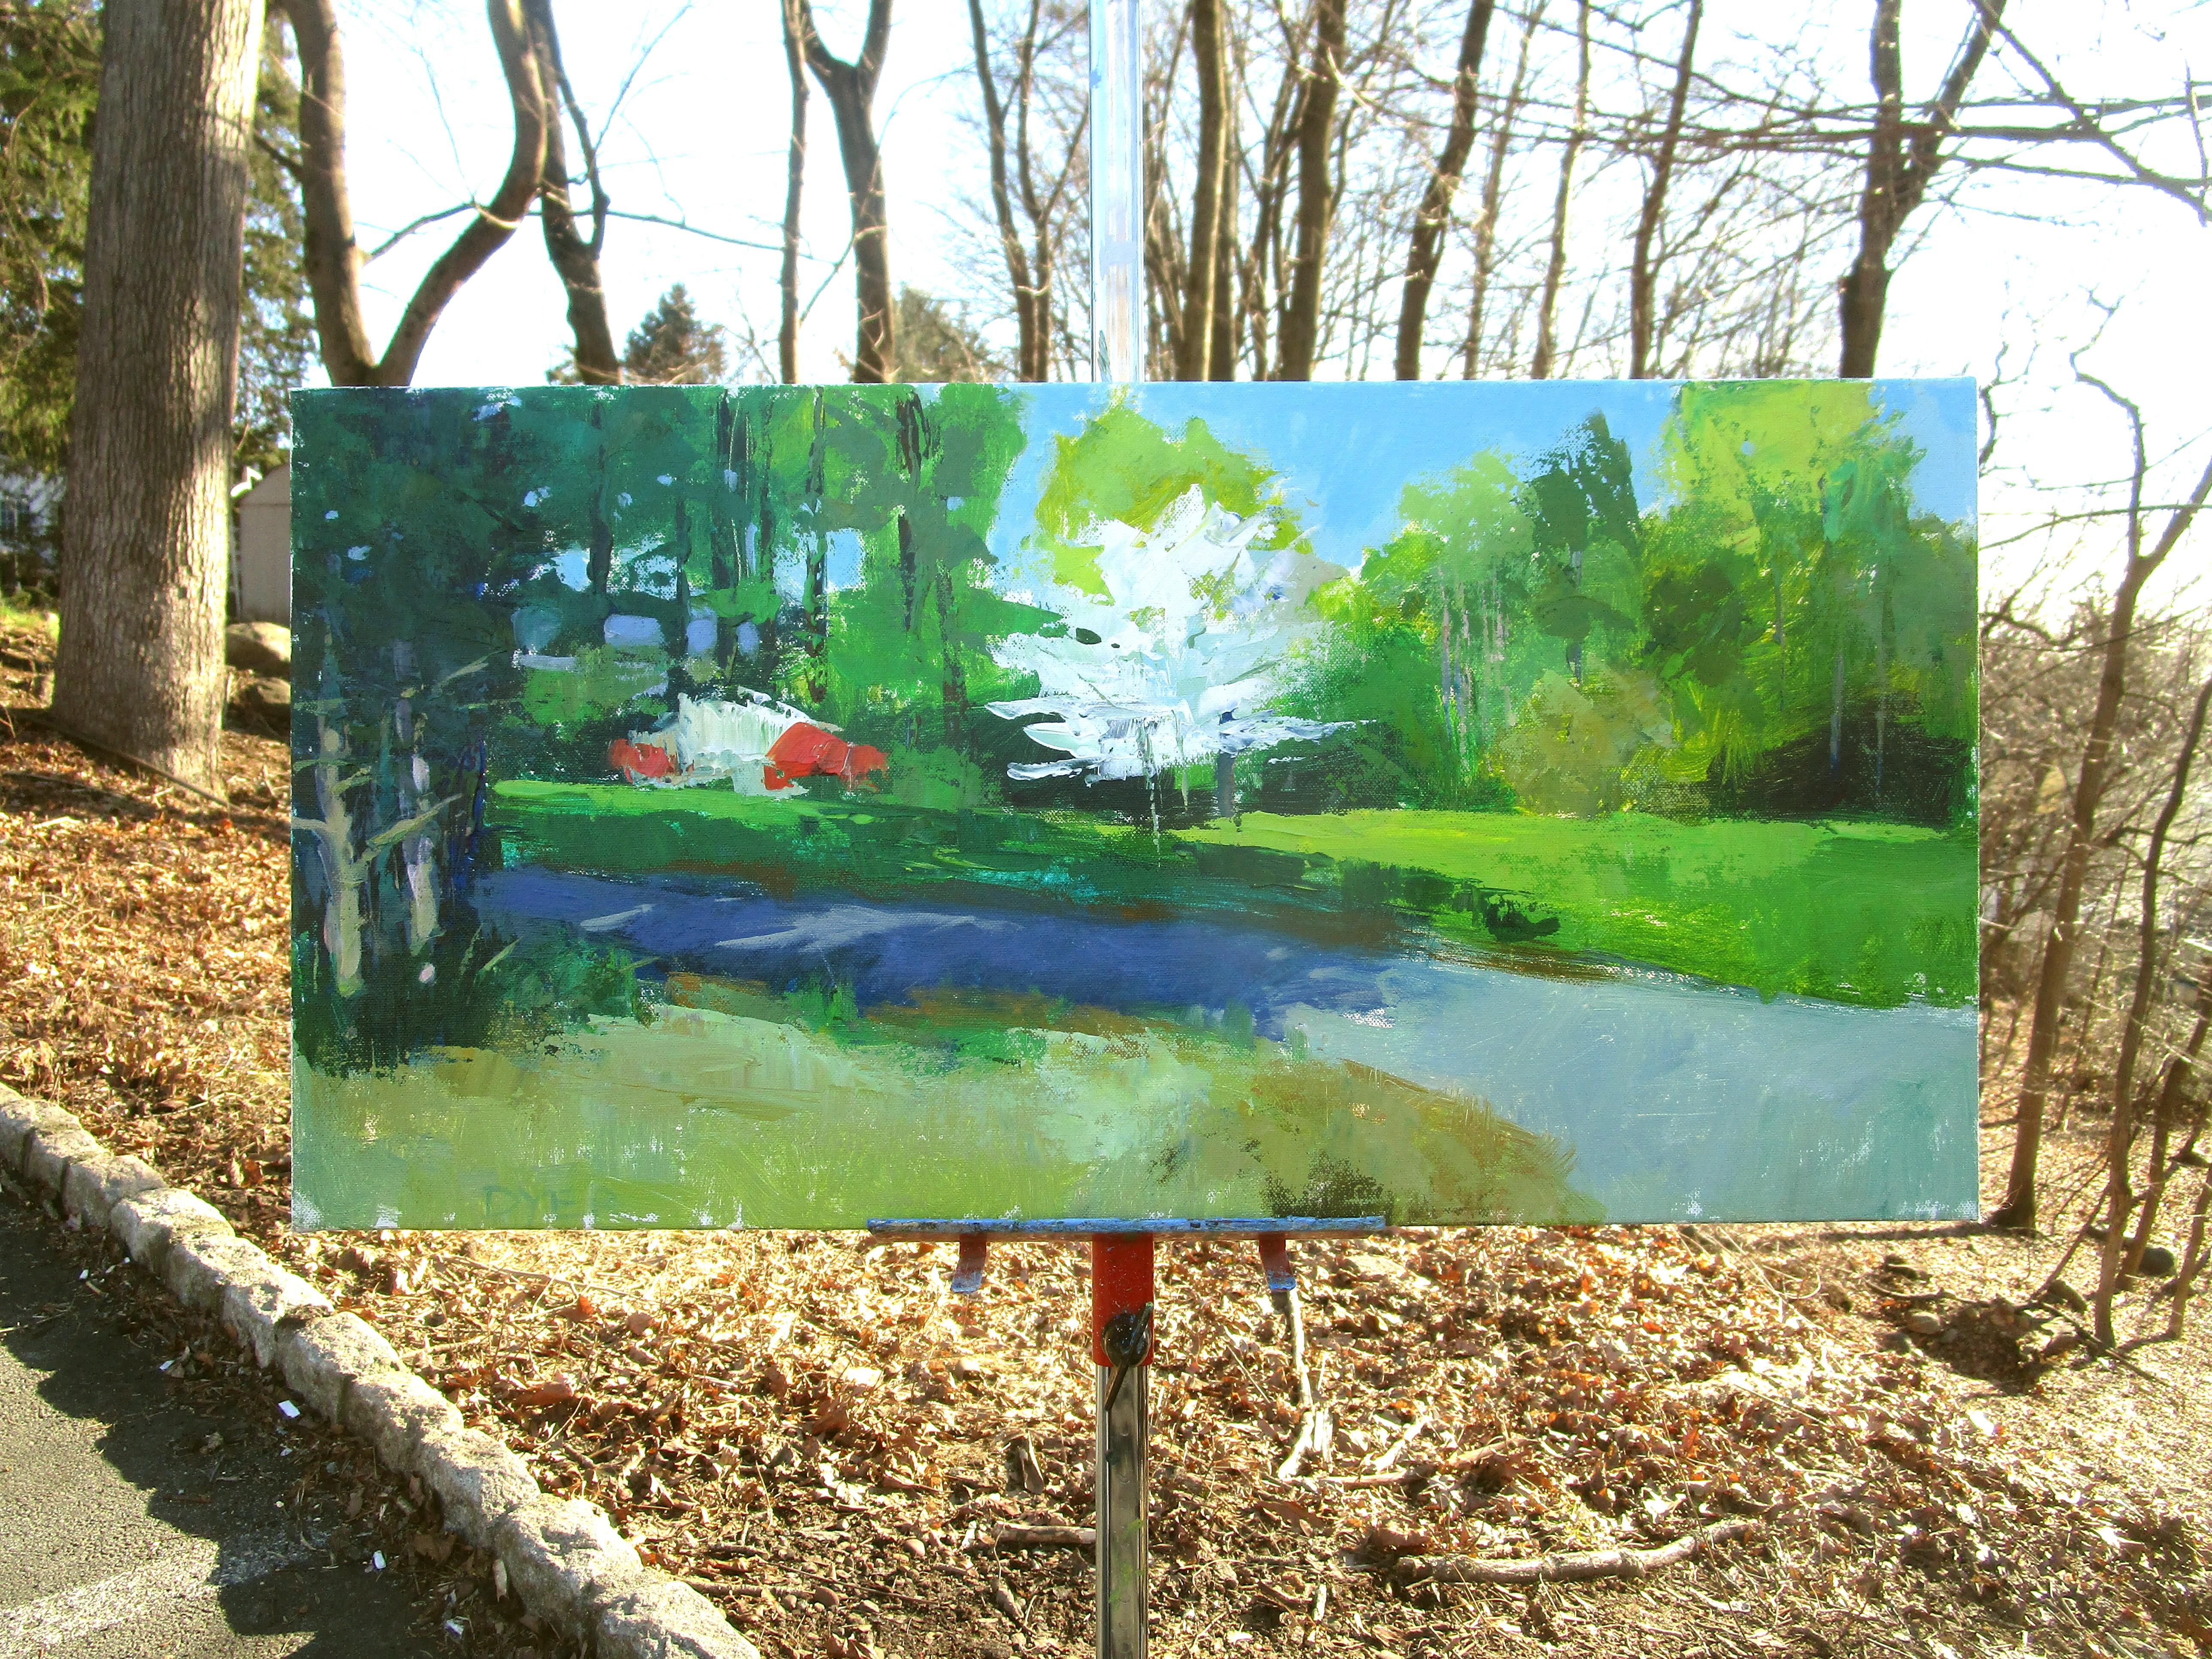 <p>Artist Comments<br>Amid the verdant landscape, a white tree blossoms in spring, with distant red flowers adding a lively touch to the scene. The painting adopts an impressionistic style, capturing the moment with loose brushstrokes and a play of